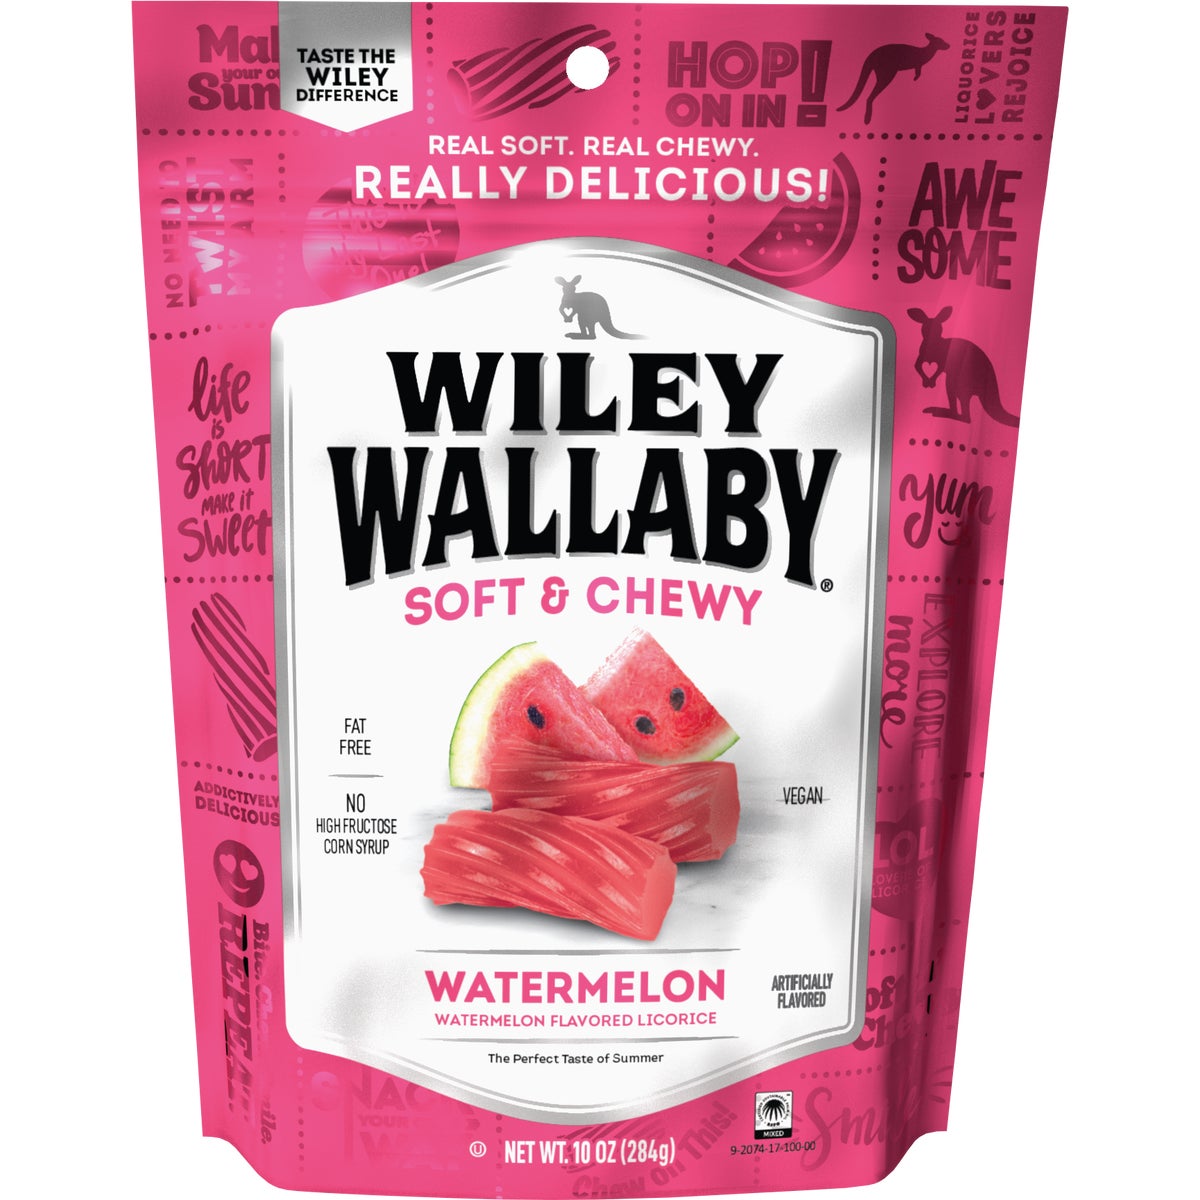 Wiley Wallaby Watermelon Licorice 10 Oz. Candy